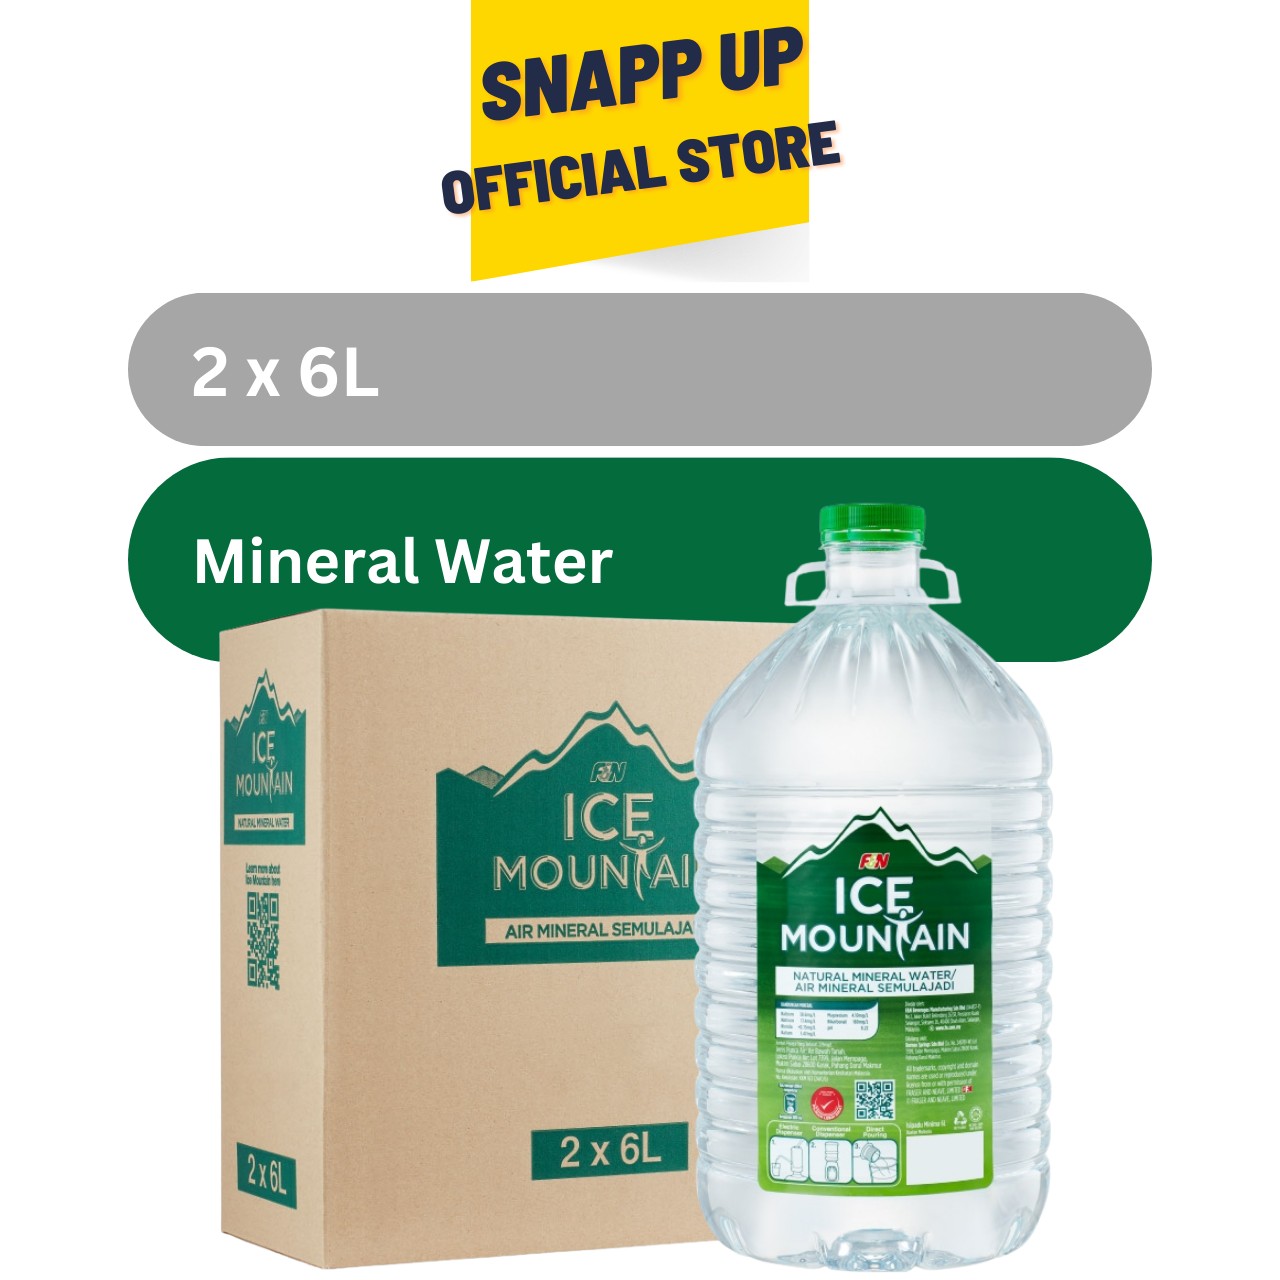 Ice Mountain Naturel Mineral Water [2 x 6L]